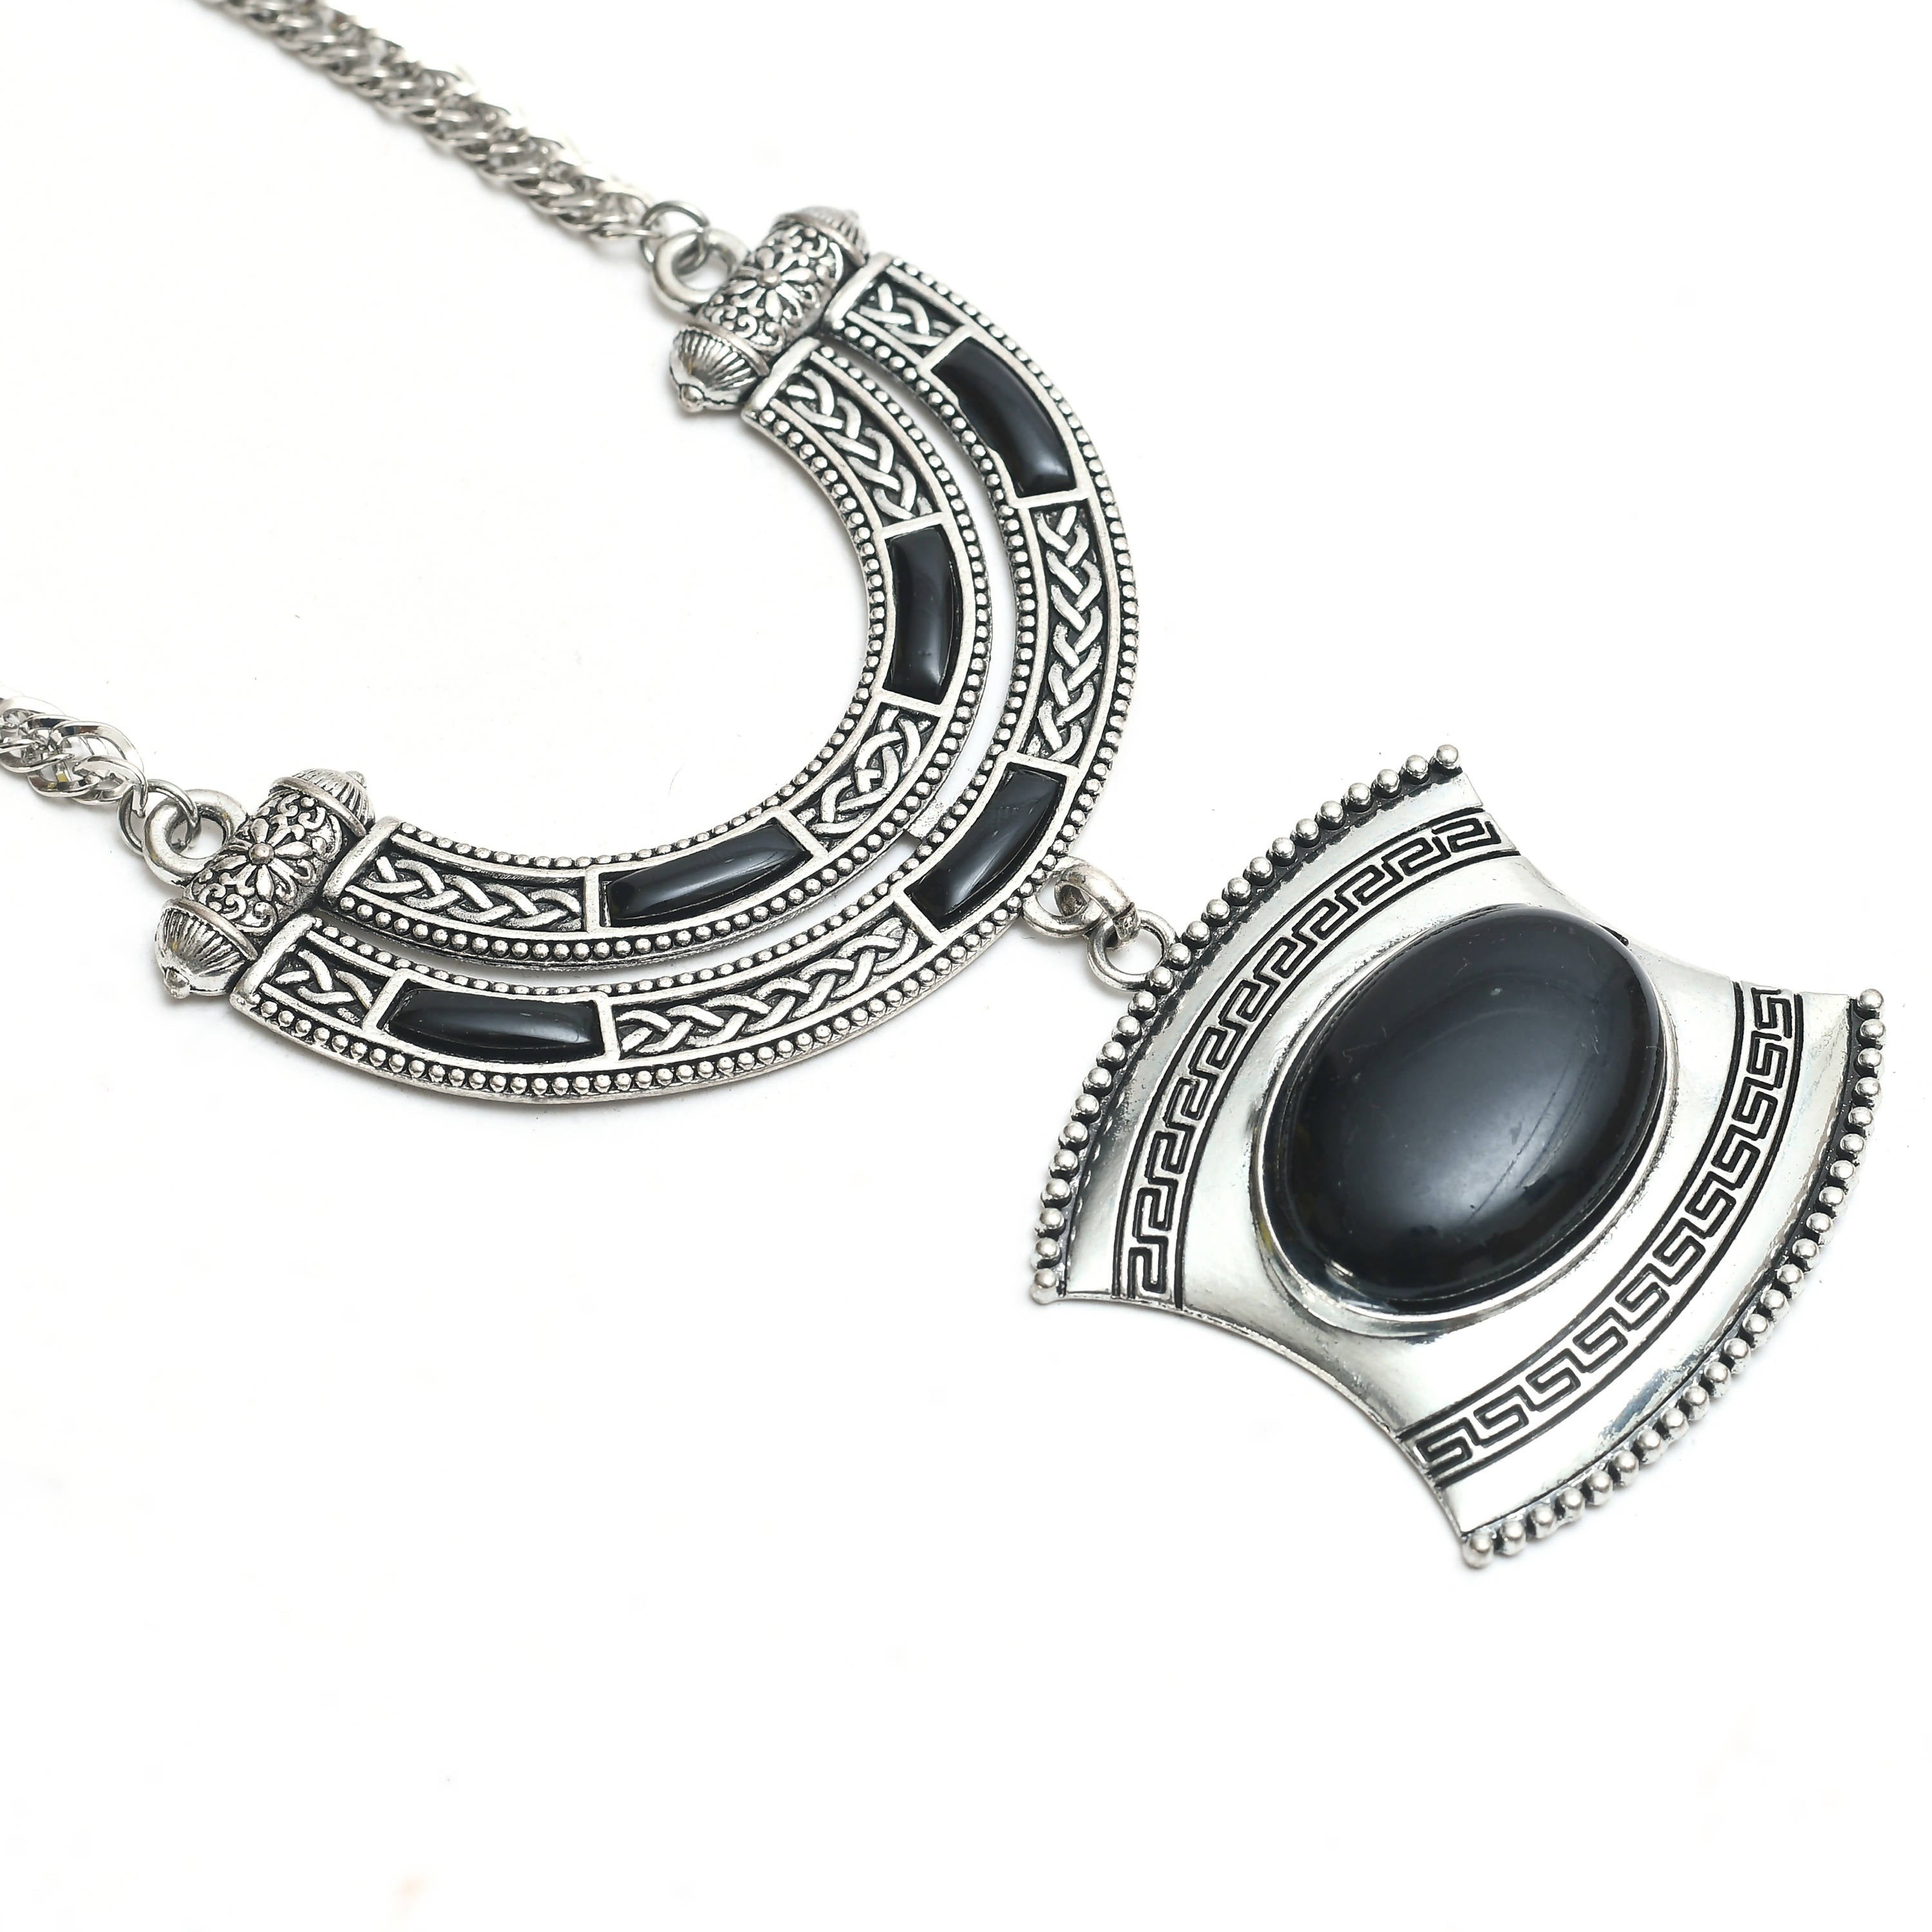 Johar Kamal Silver-Plated Black Nacklace with Earrings Jkms_019